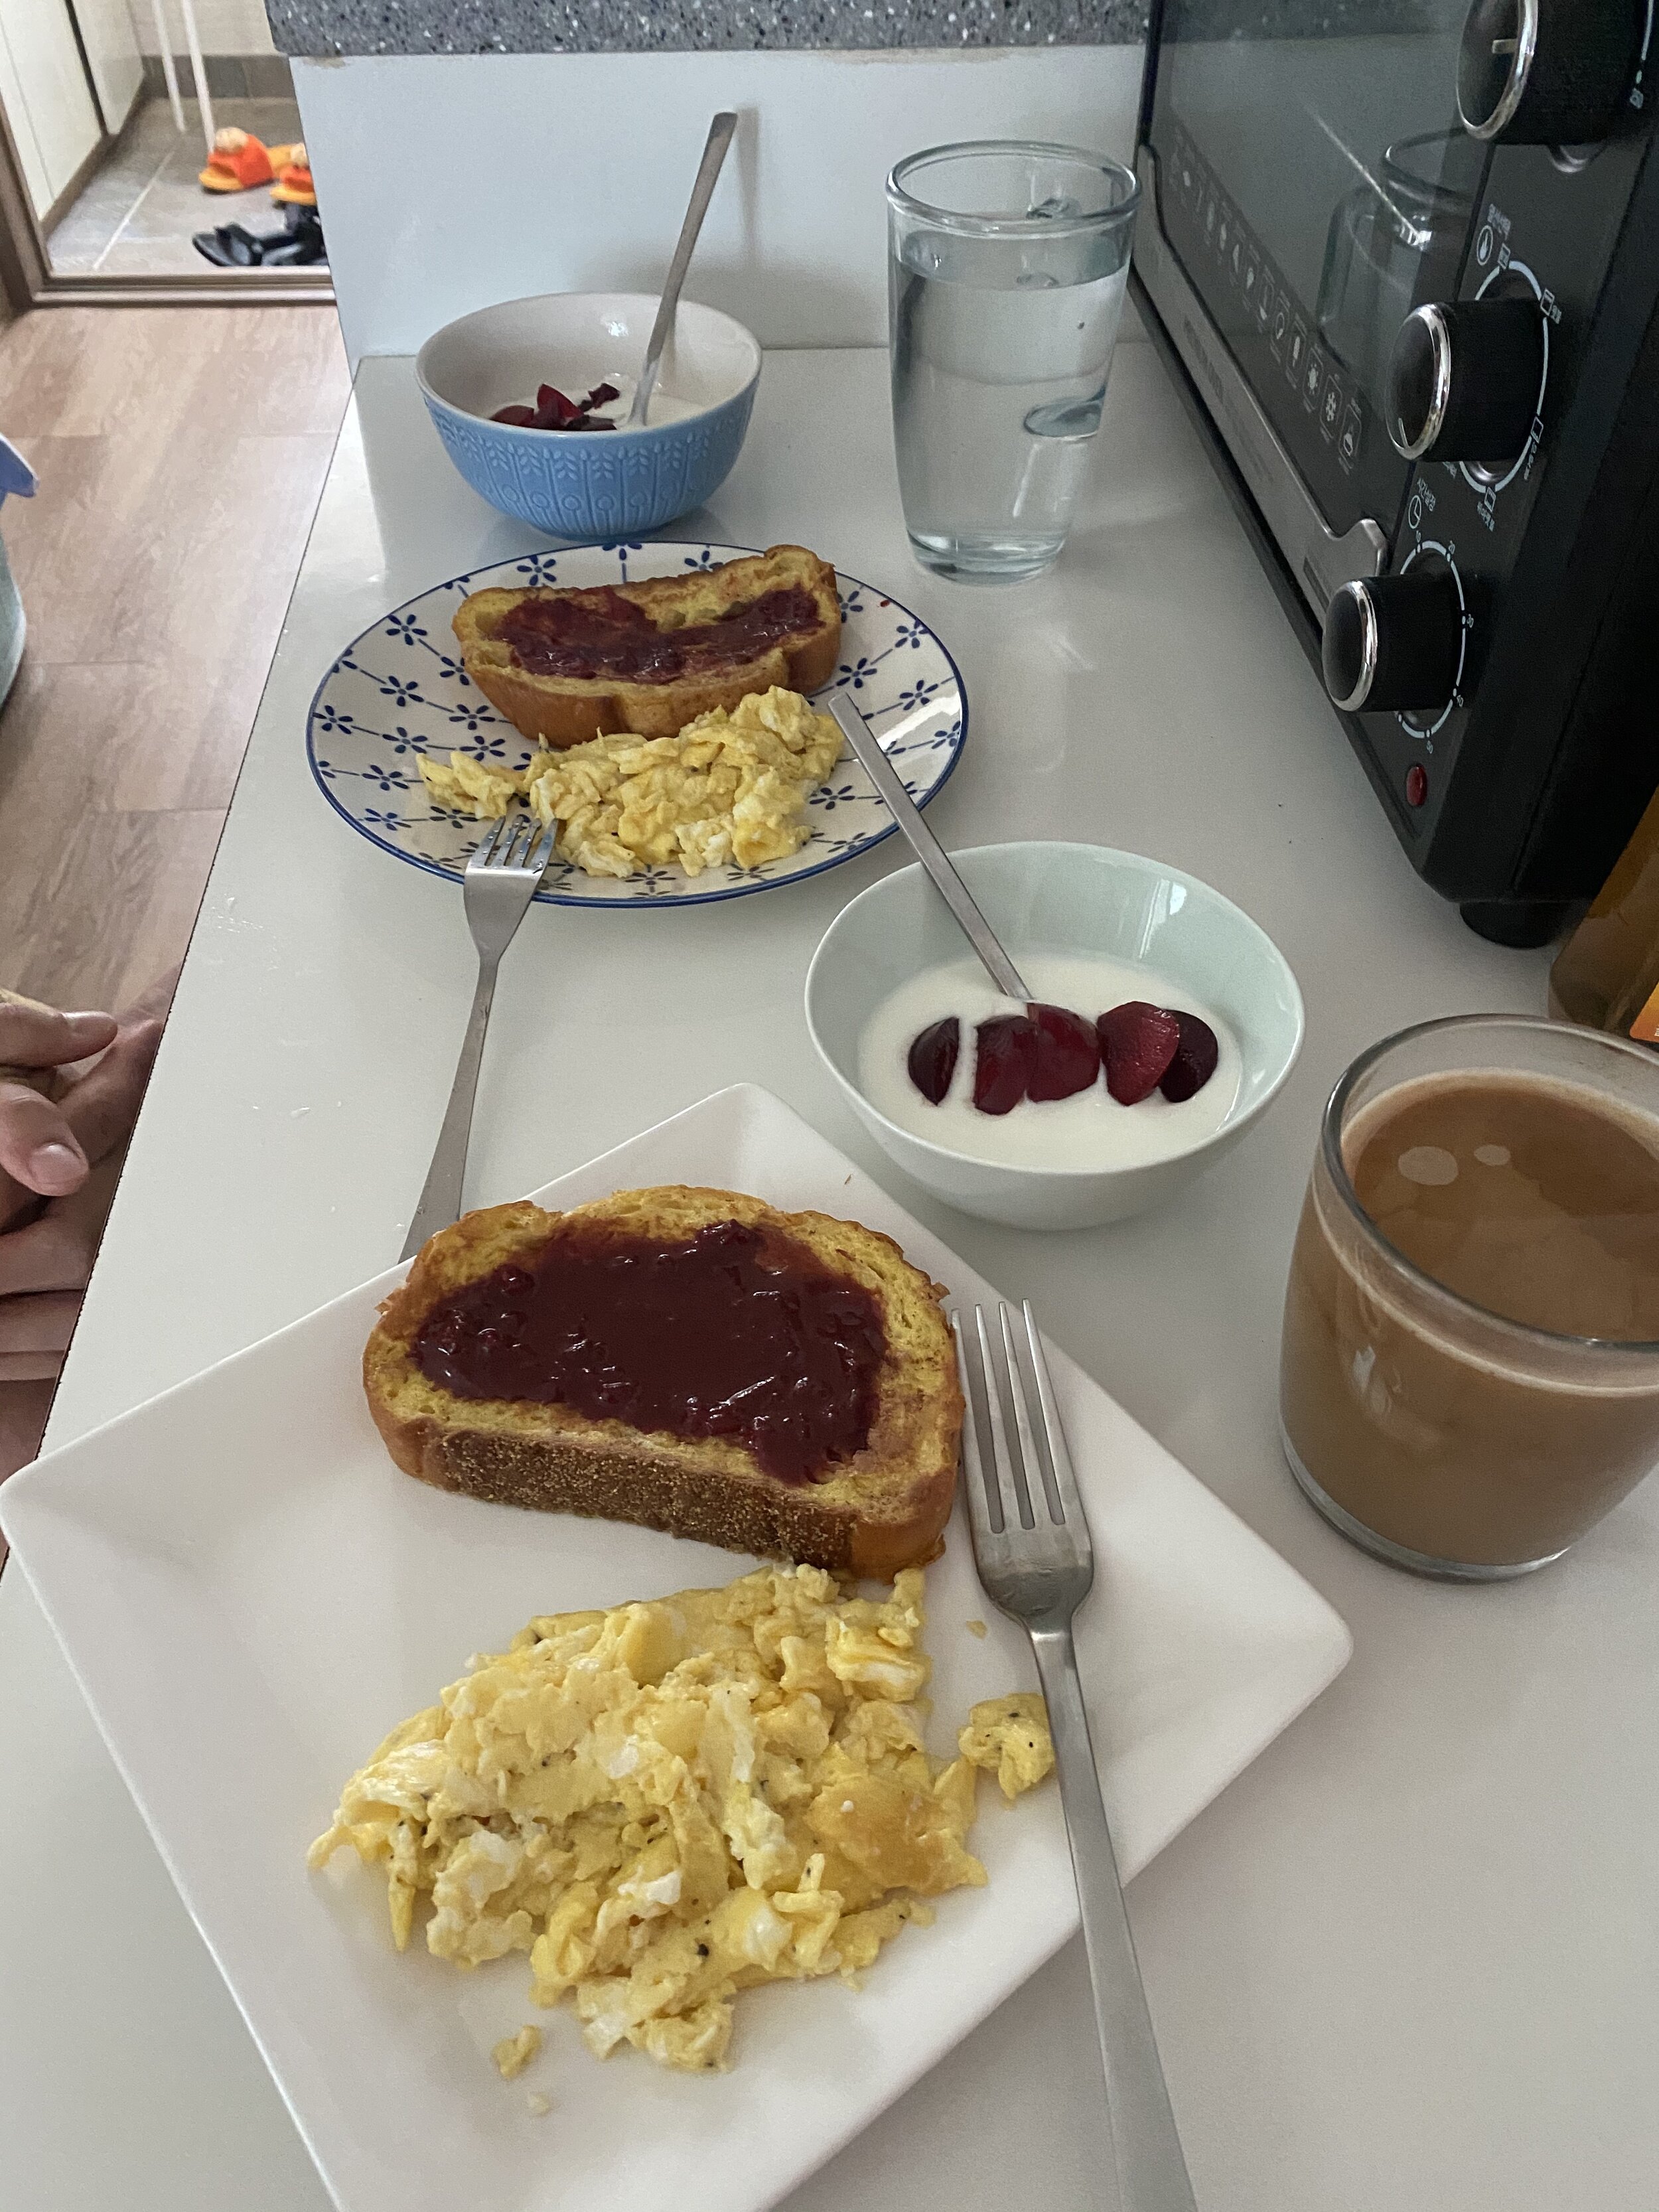 eggs, french toast, &amp; plum chocolate compote